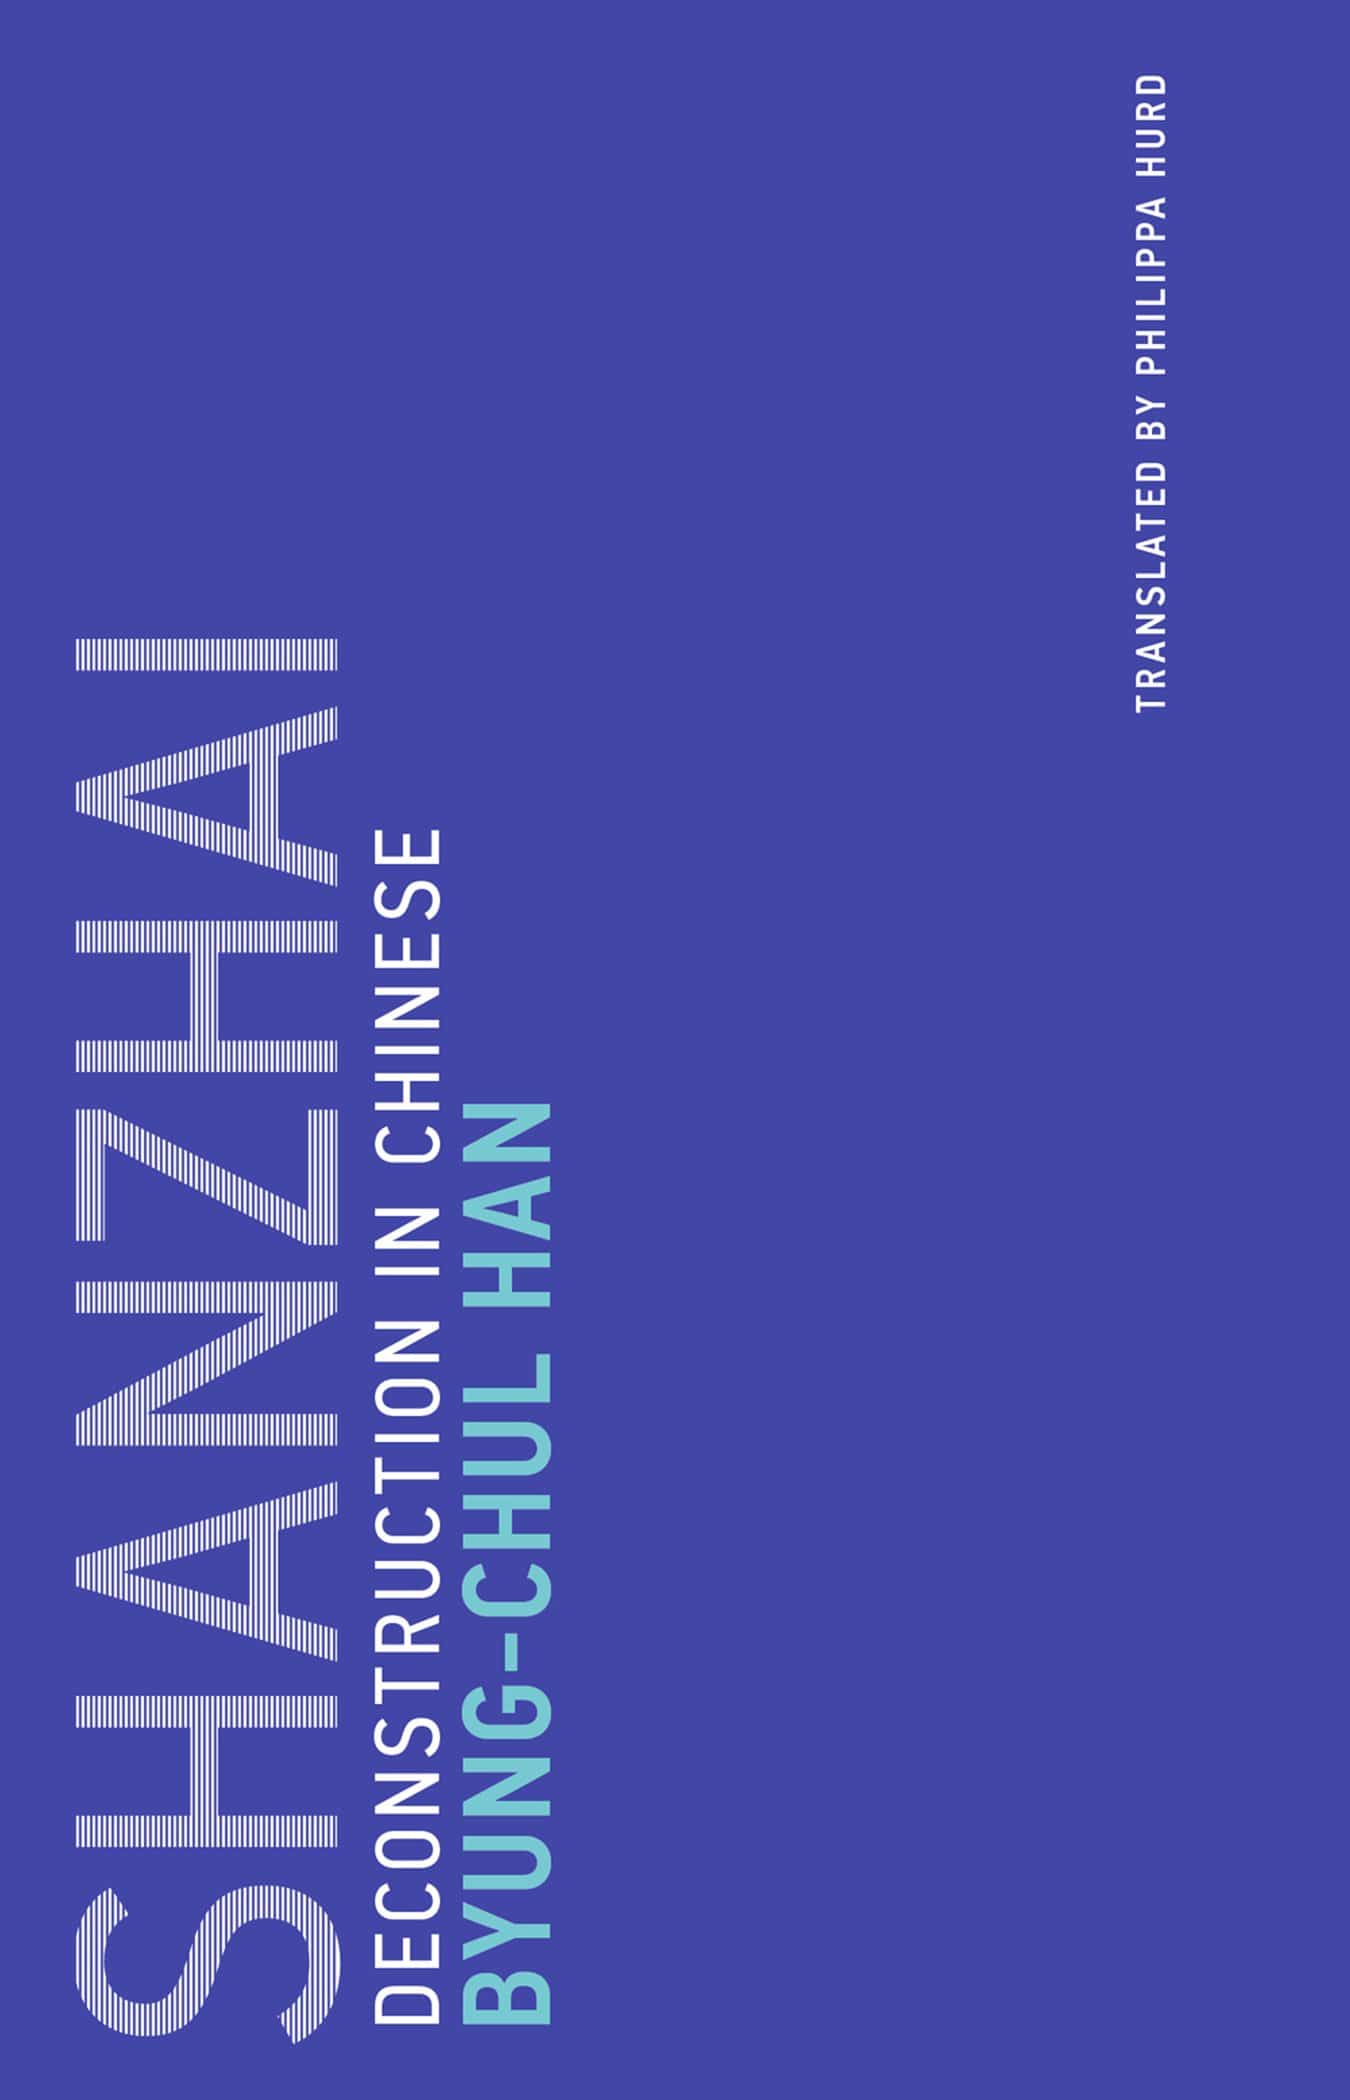 The cover of Shanzhai